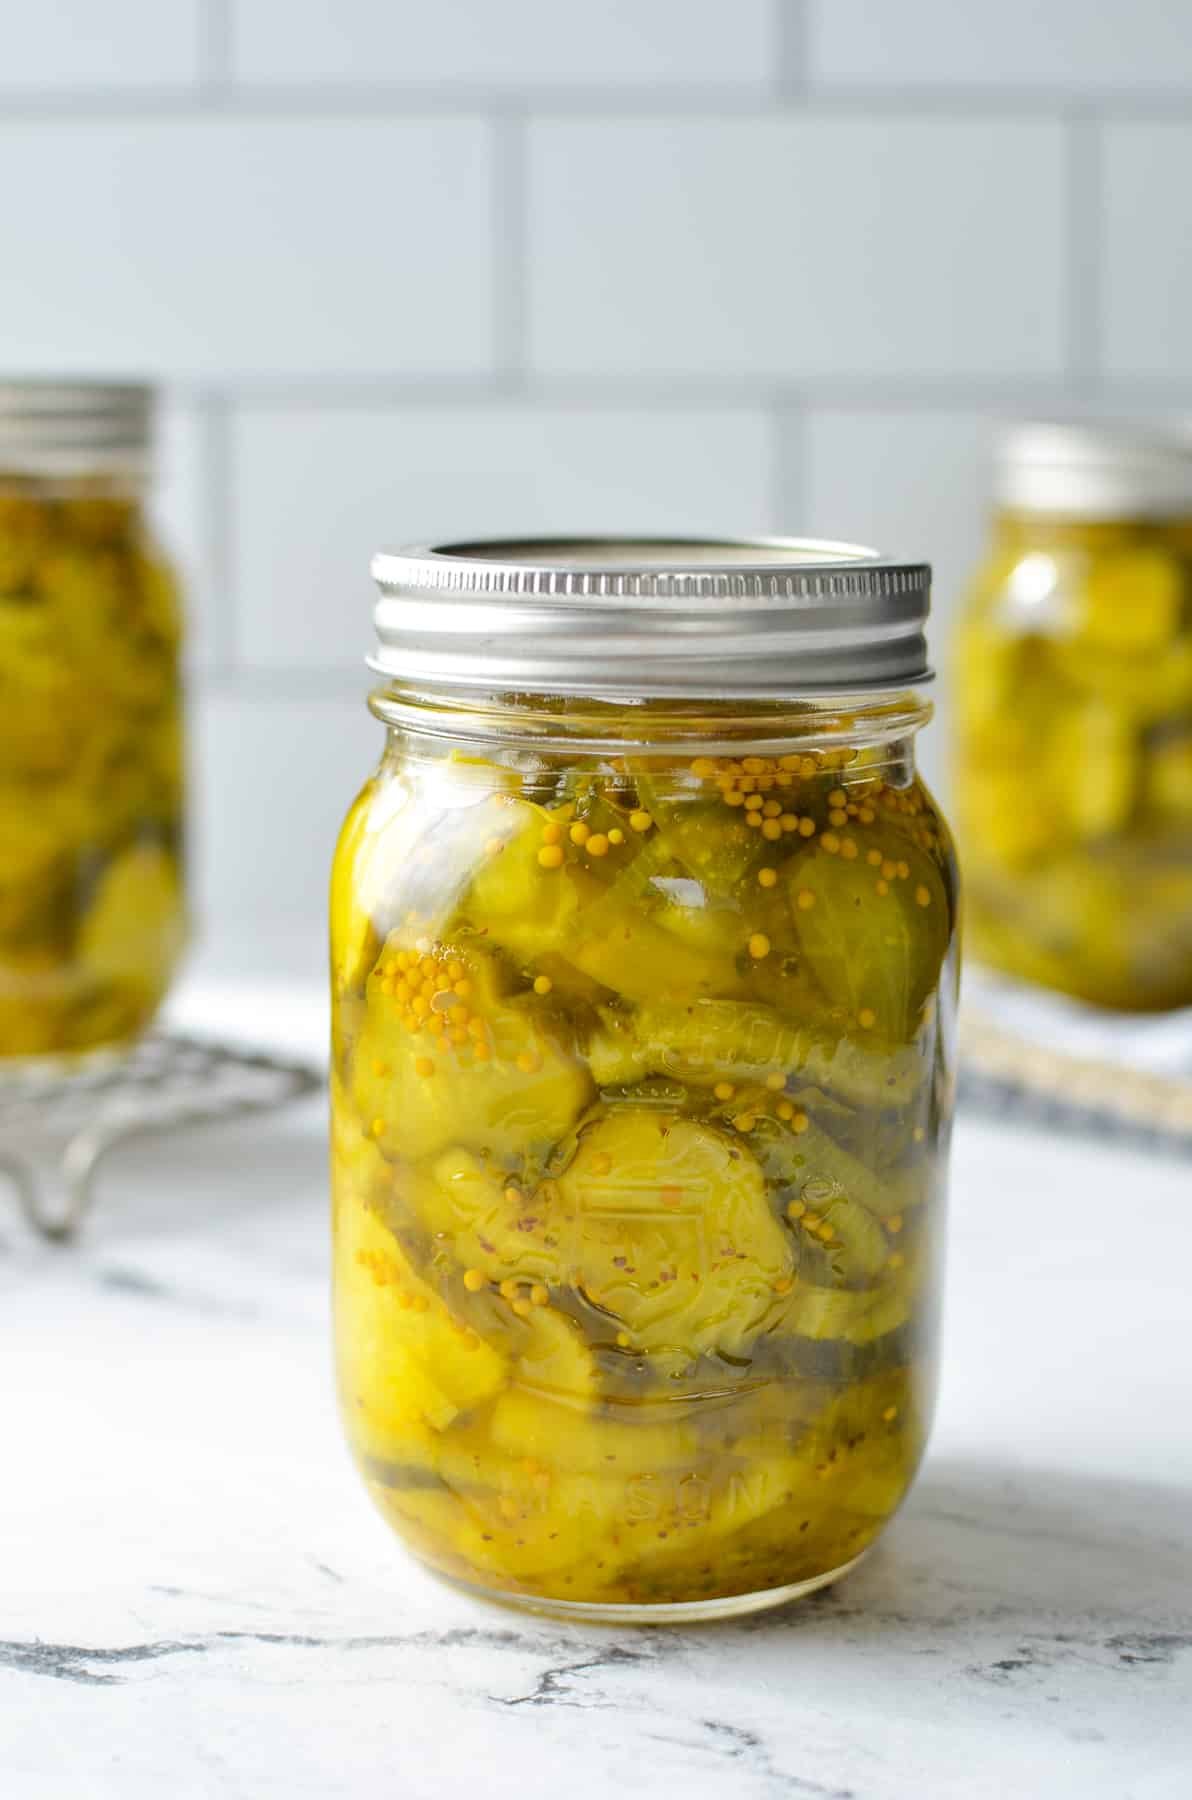 A jar of finished bread and butter pickles on a marble counter.